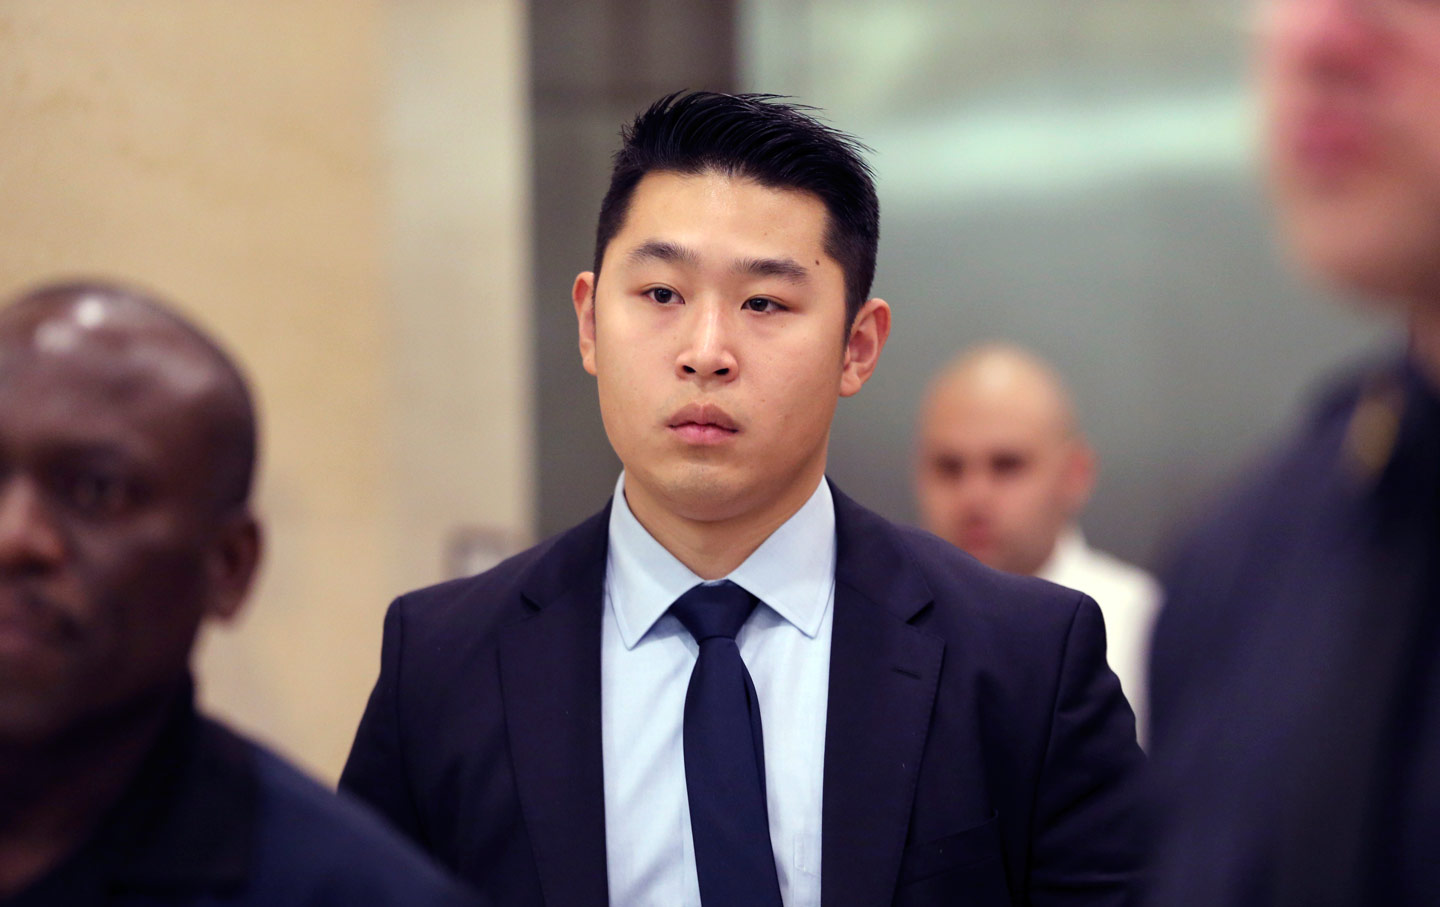 Chinese Americans Want NYPD Officer Peter Liang Held Accountable, Too